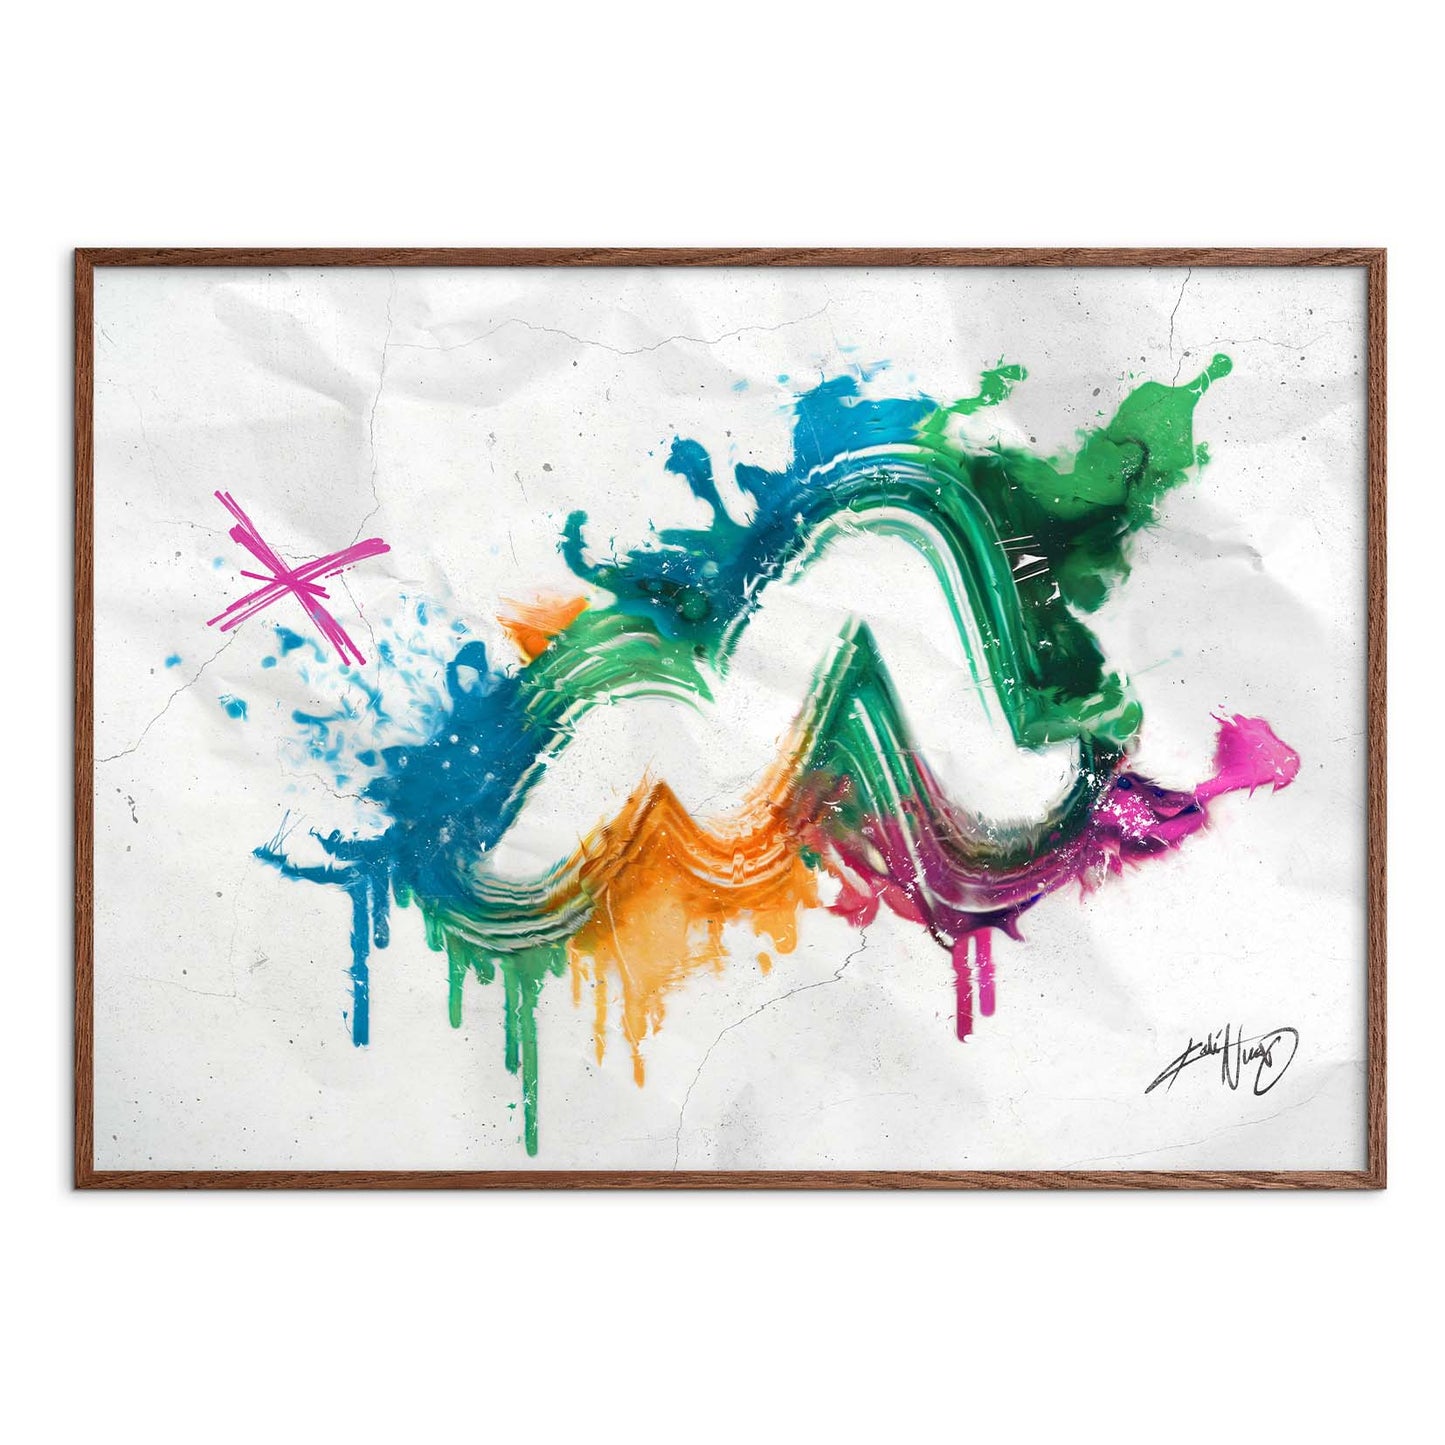 colorful calligraphy abstract art poster in a smoked oak wooden frame on a white background